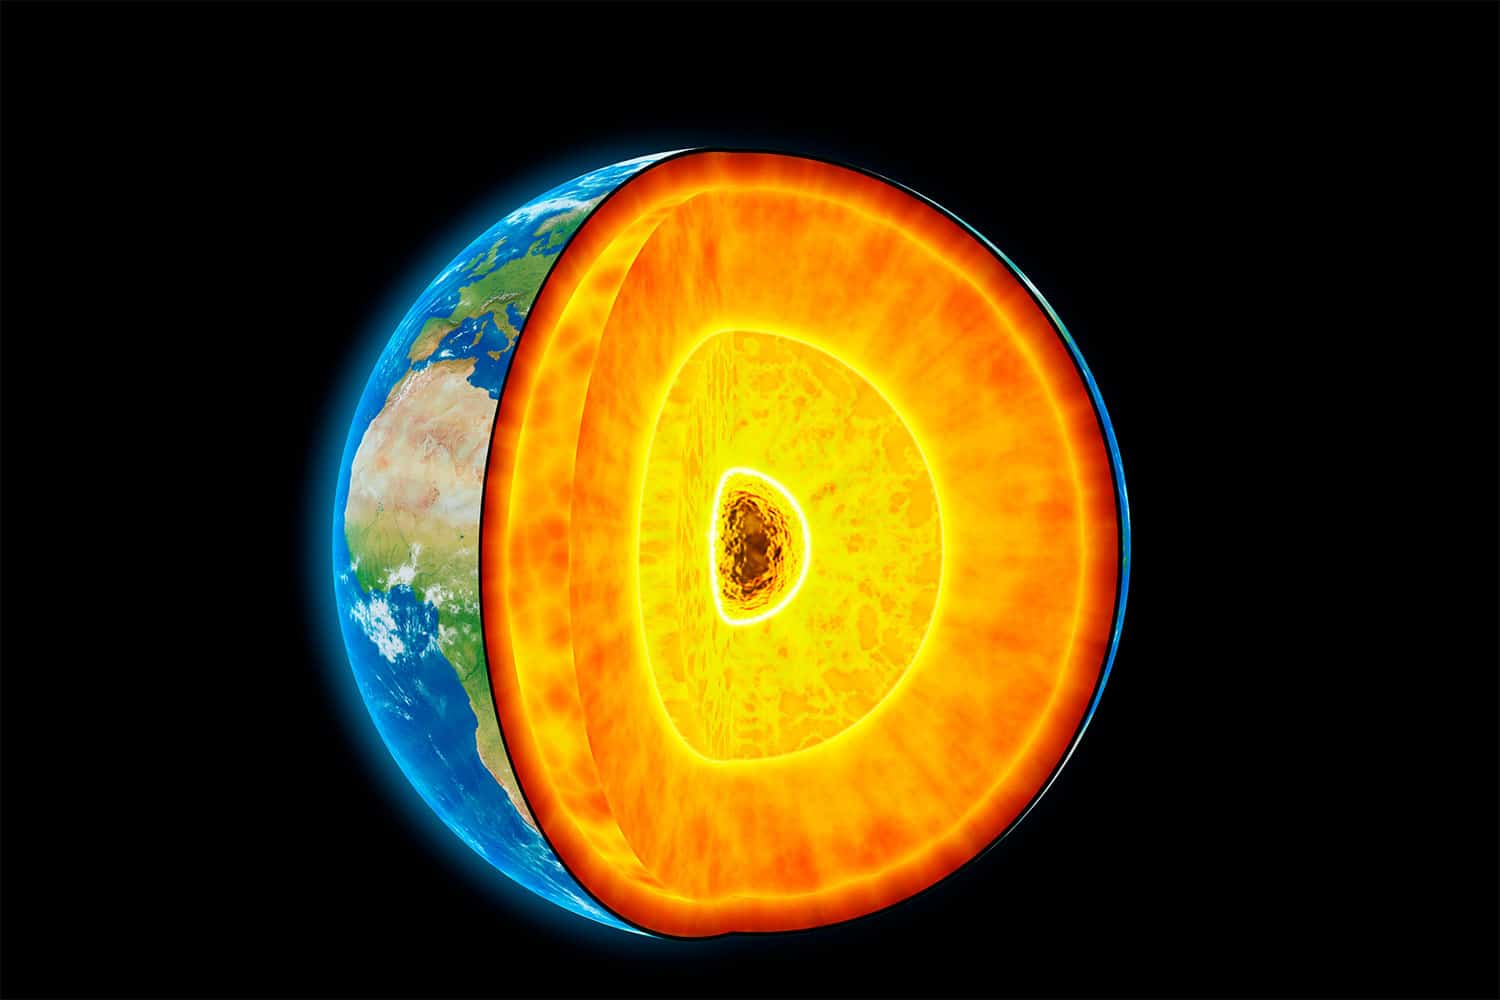 Image showing earth's interior structure